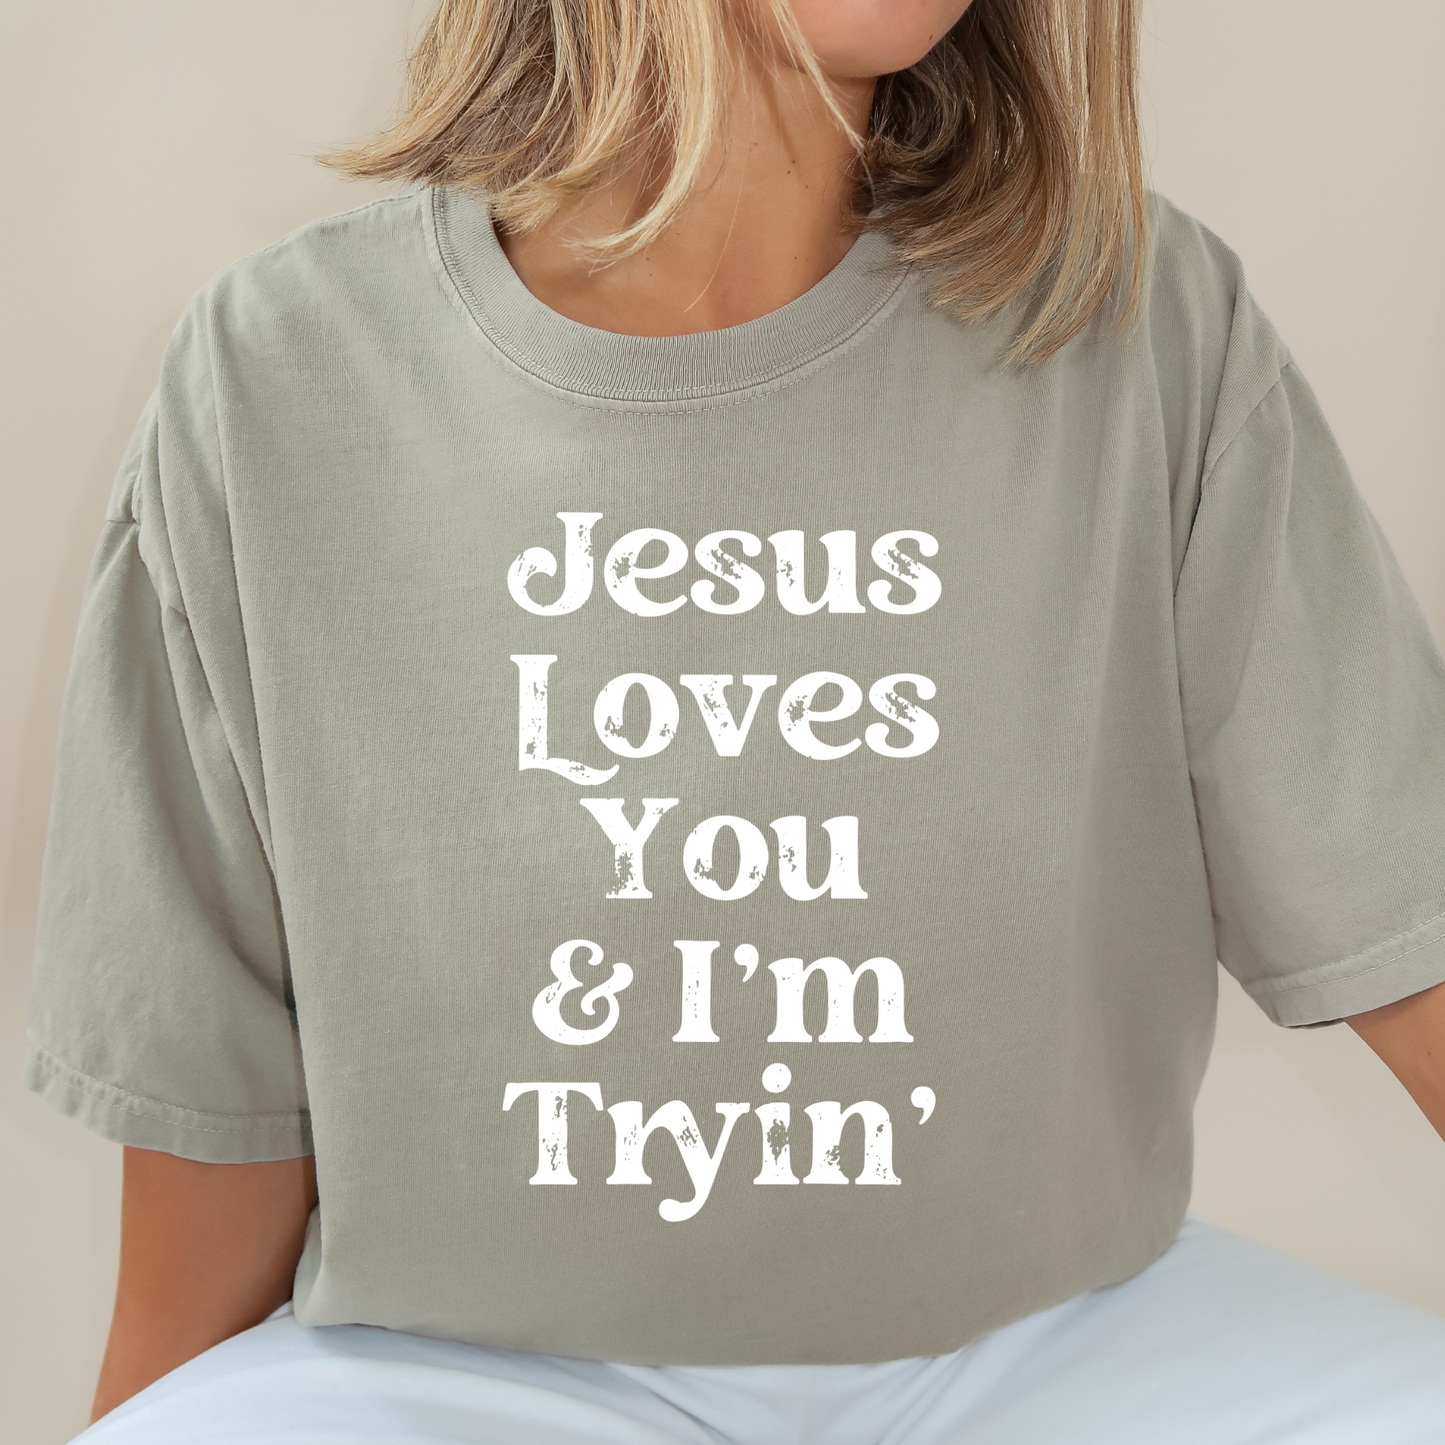 Jesus Loves You & I'm Tryin' | Comfort Colors Ring-Spun Cotton | He Found Me | Christian Bible Verse Tee